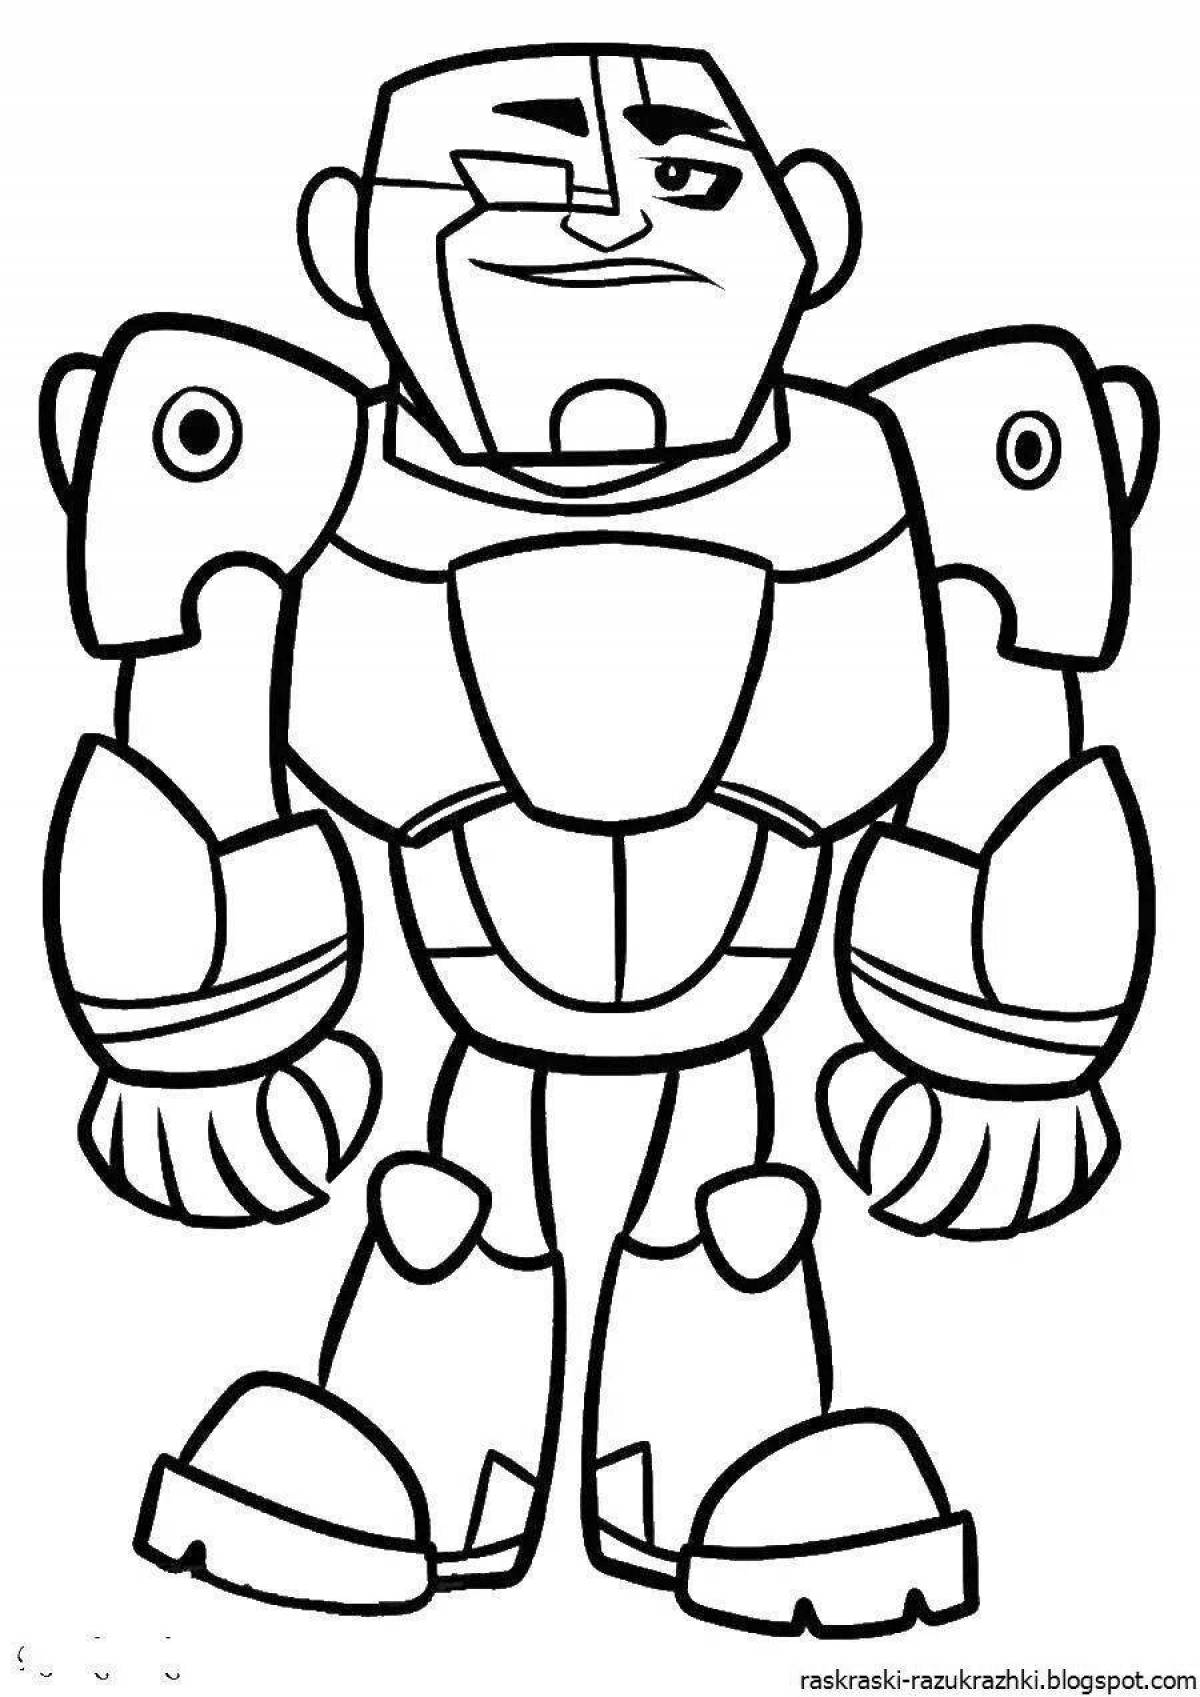 Fun tobots coloring for kids